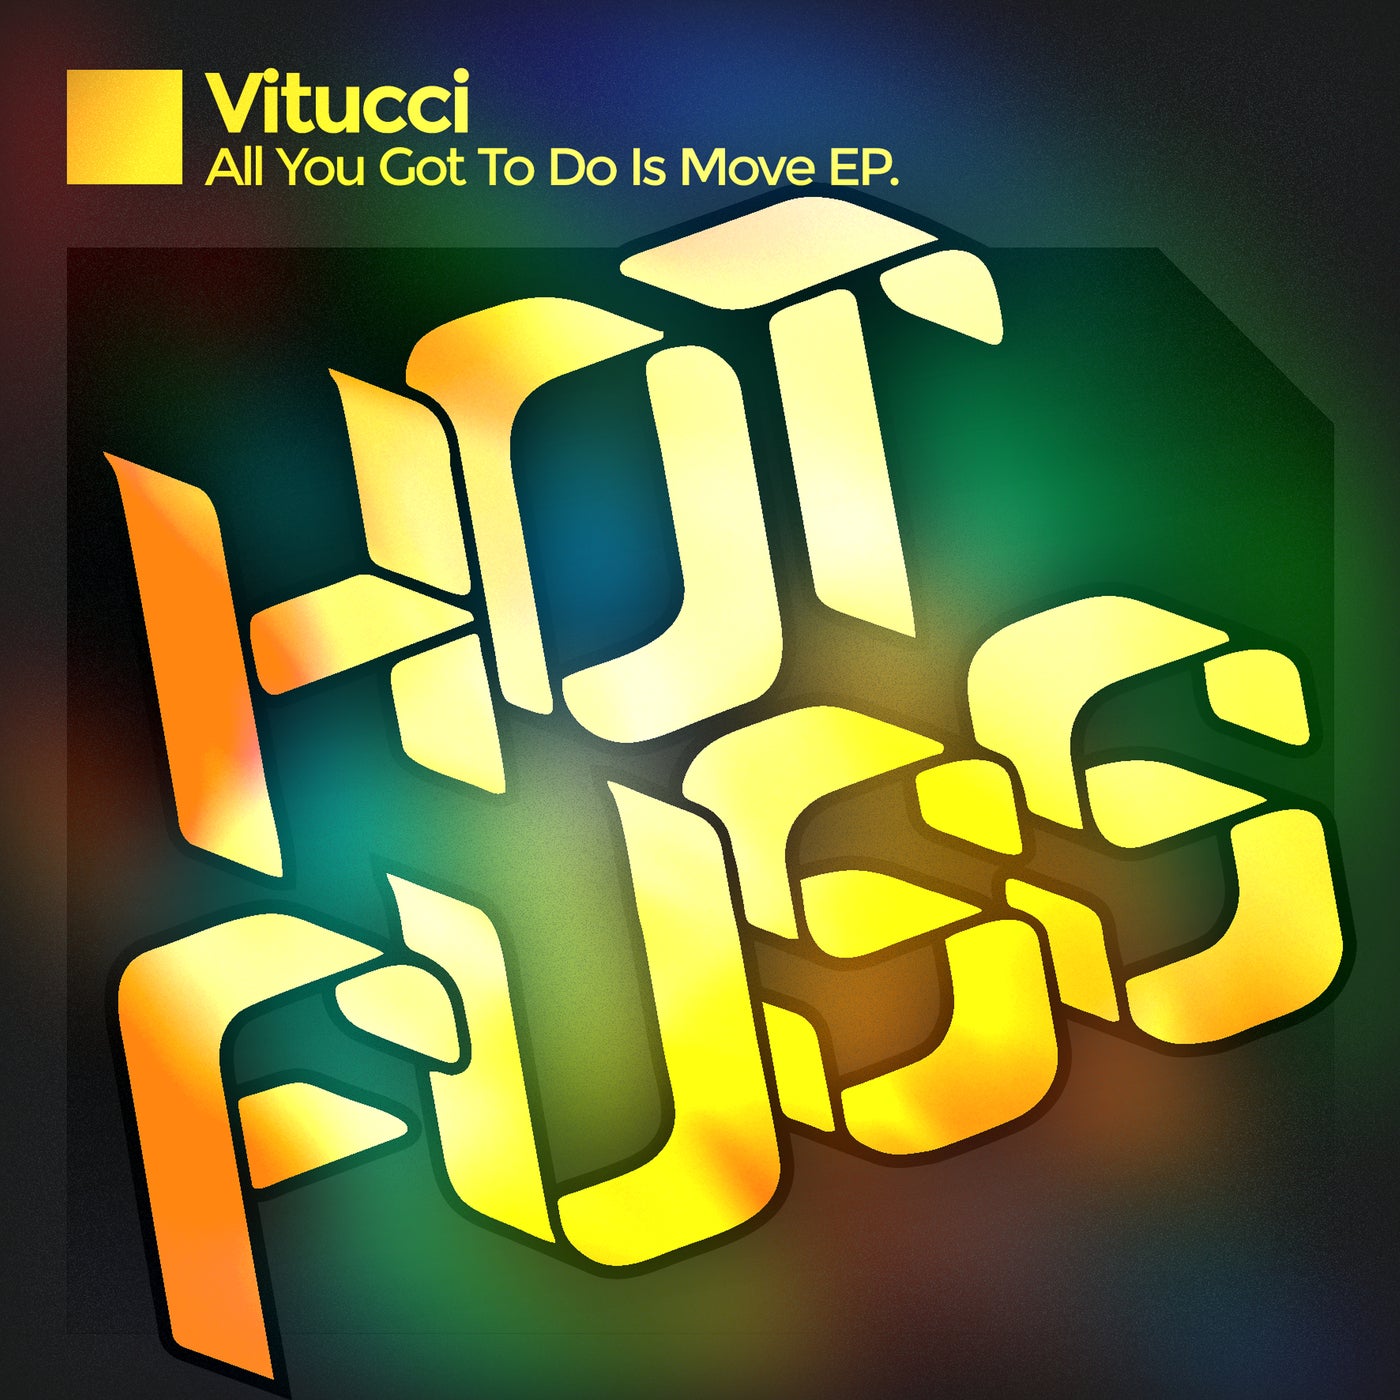 VITUCCI - All You Got to Do is Move EP [HF092BP]